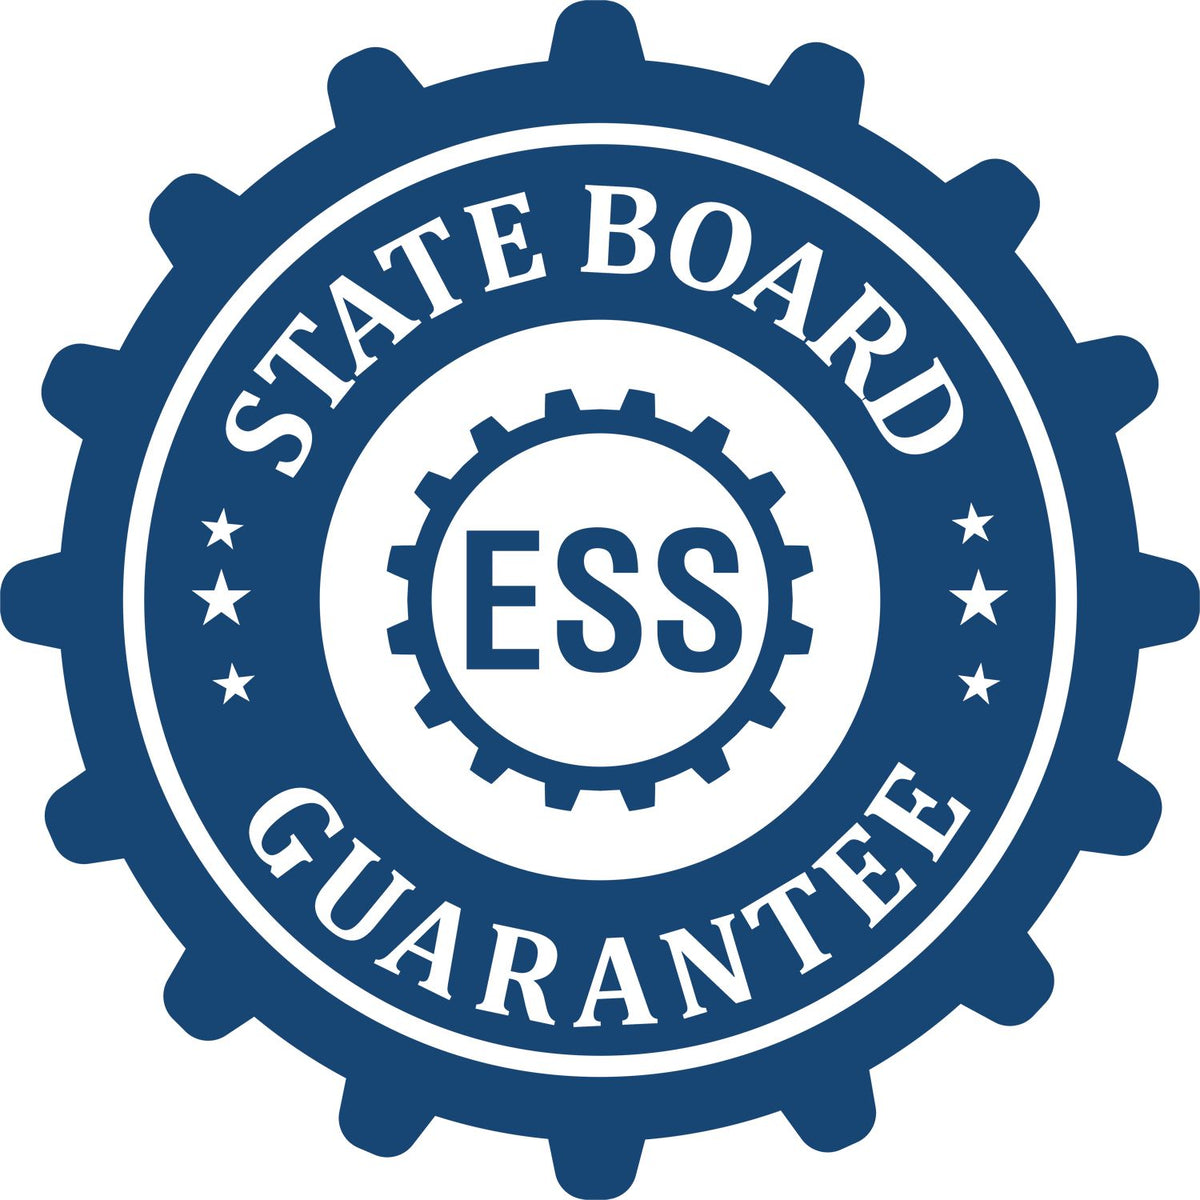 An emblem in a gear shape illustrating a state board guarantee for the State of Montana Extended Long Reach Geologist Seal